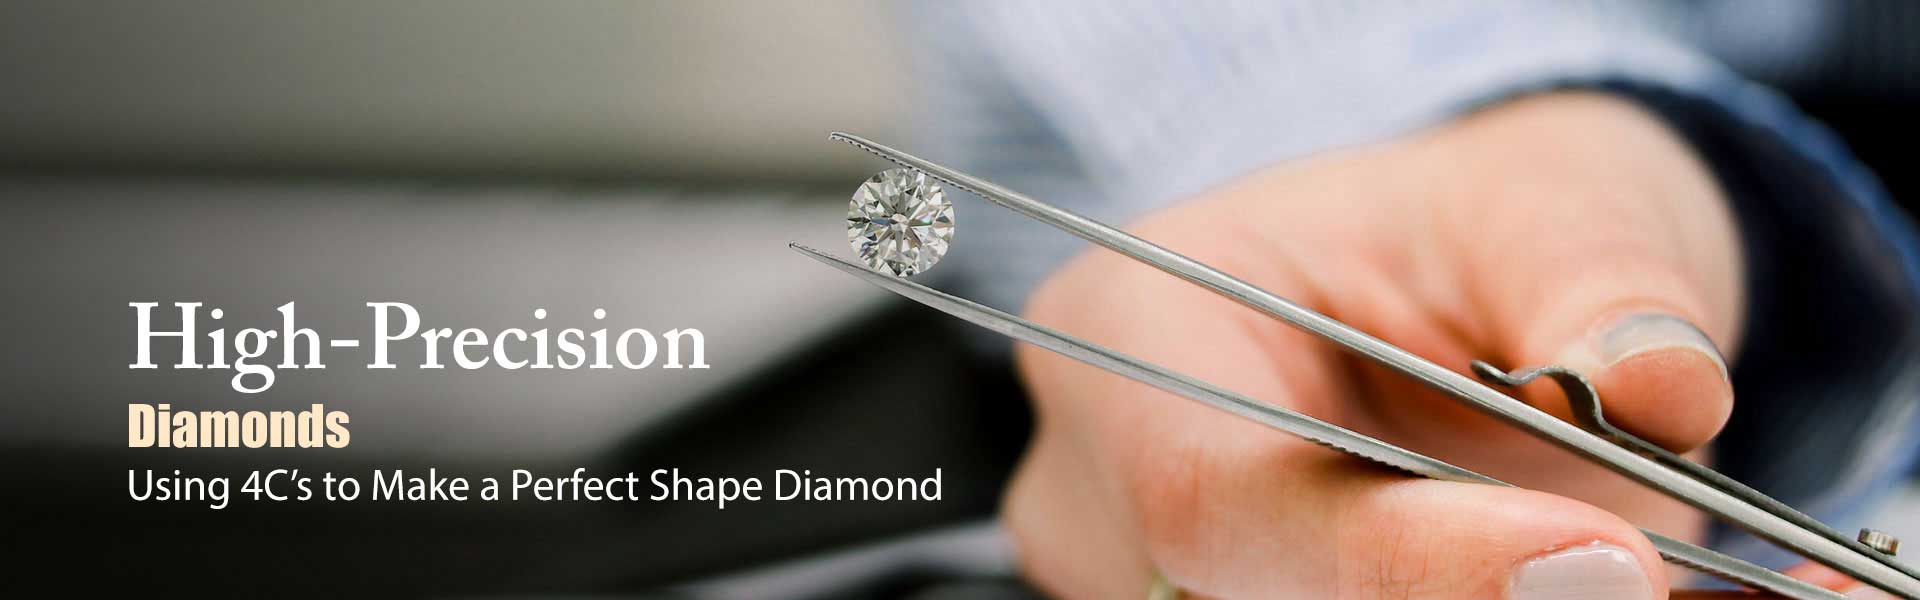  Certified Diamond  Manufacturers in Cape Town